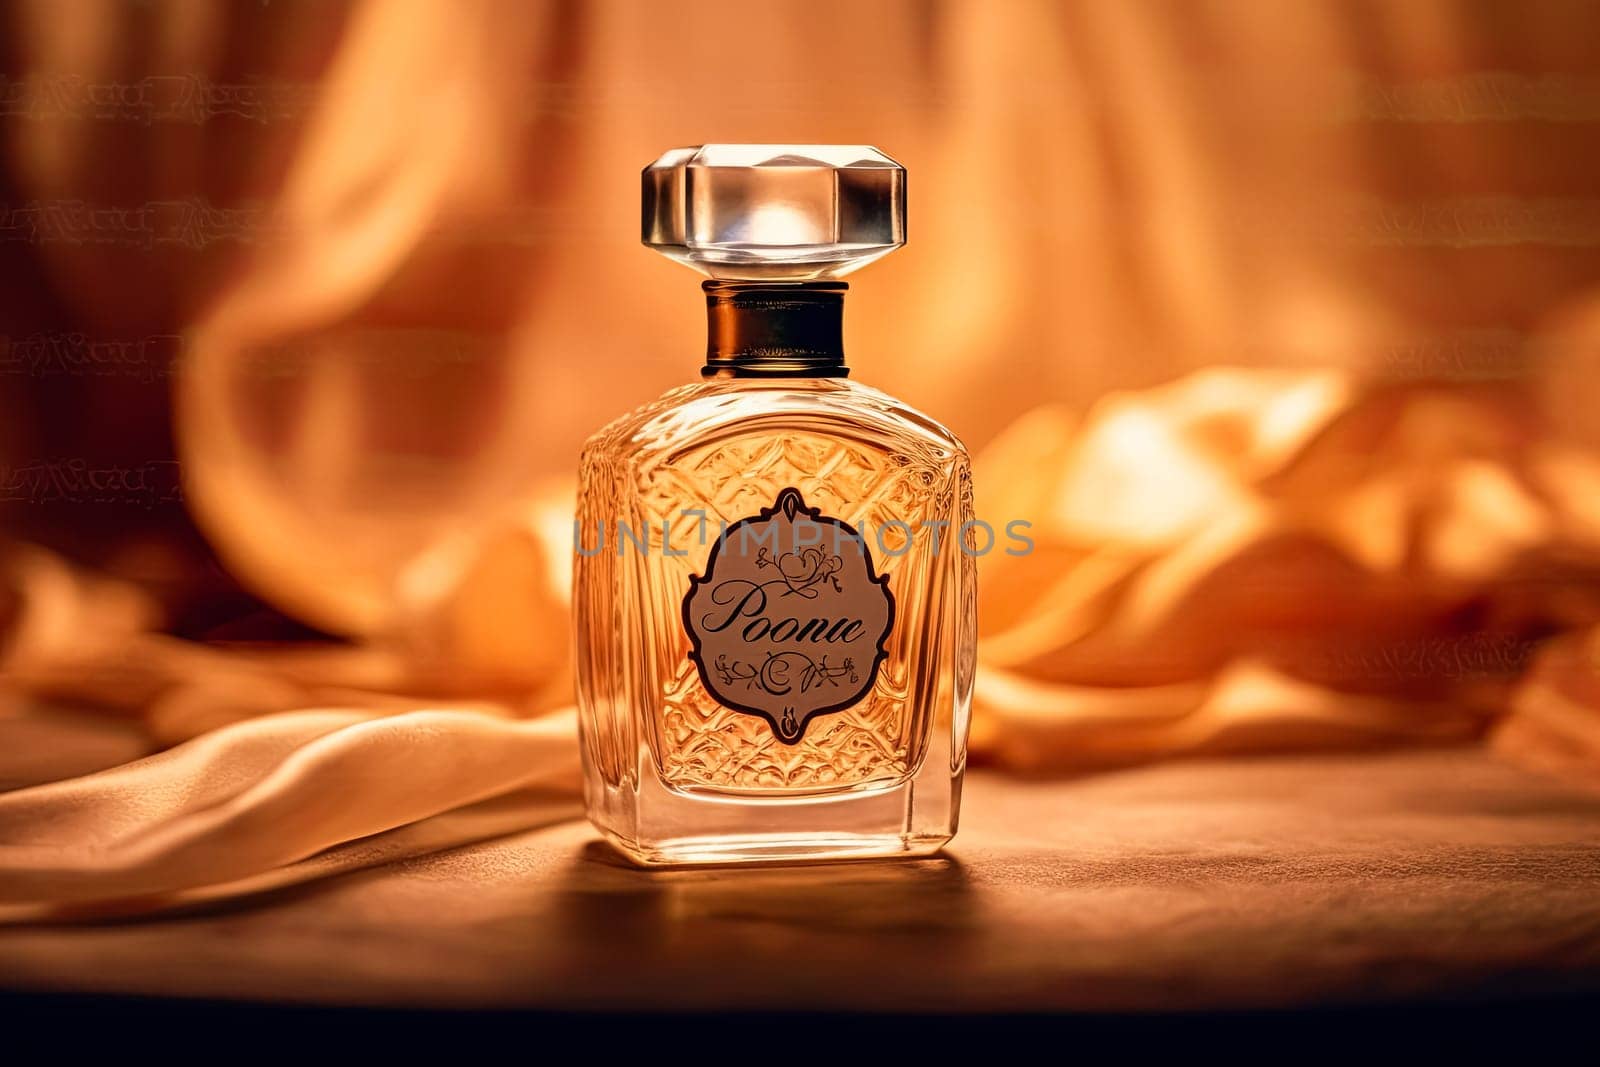 Luxury perfume with a golden insert on the bottle against a blurred background.